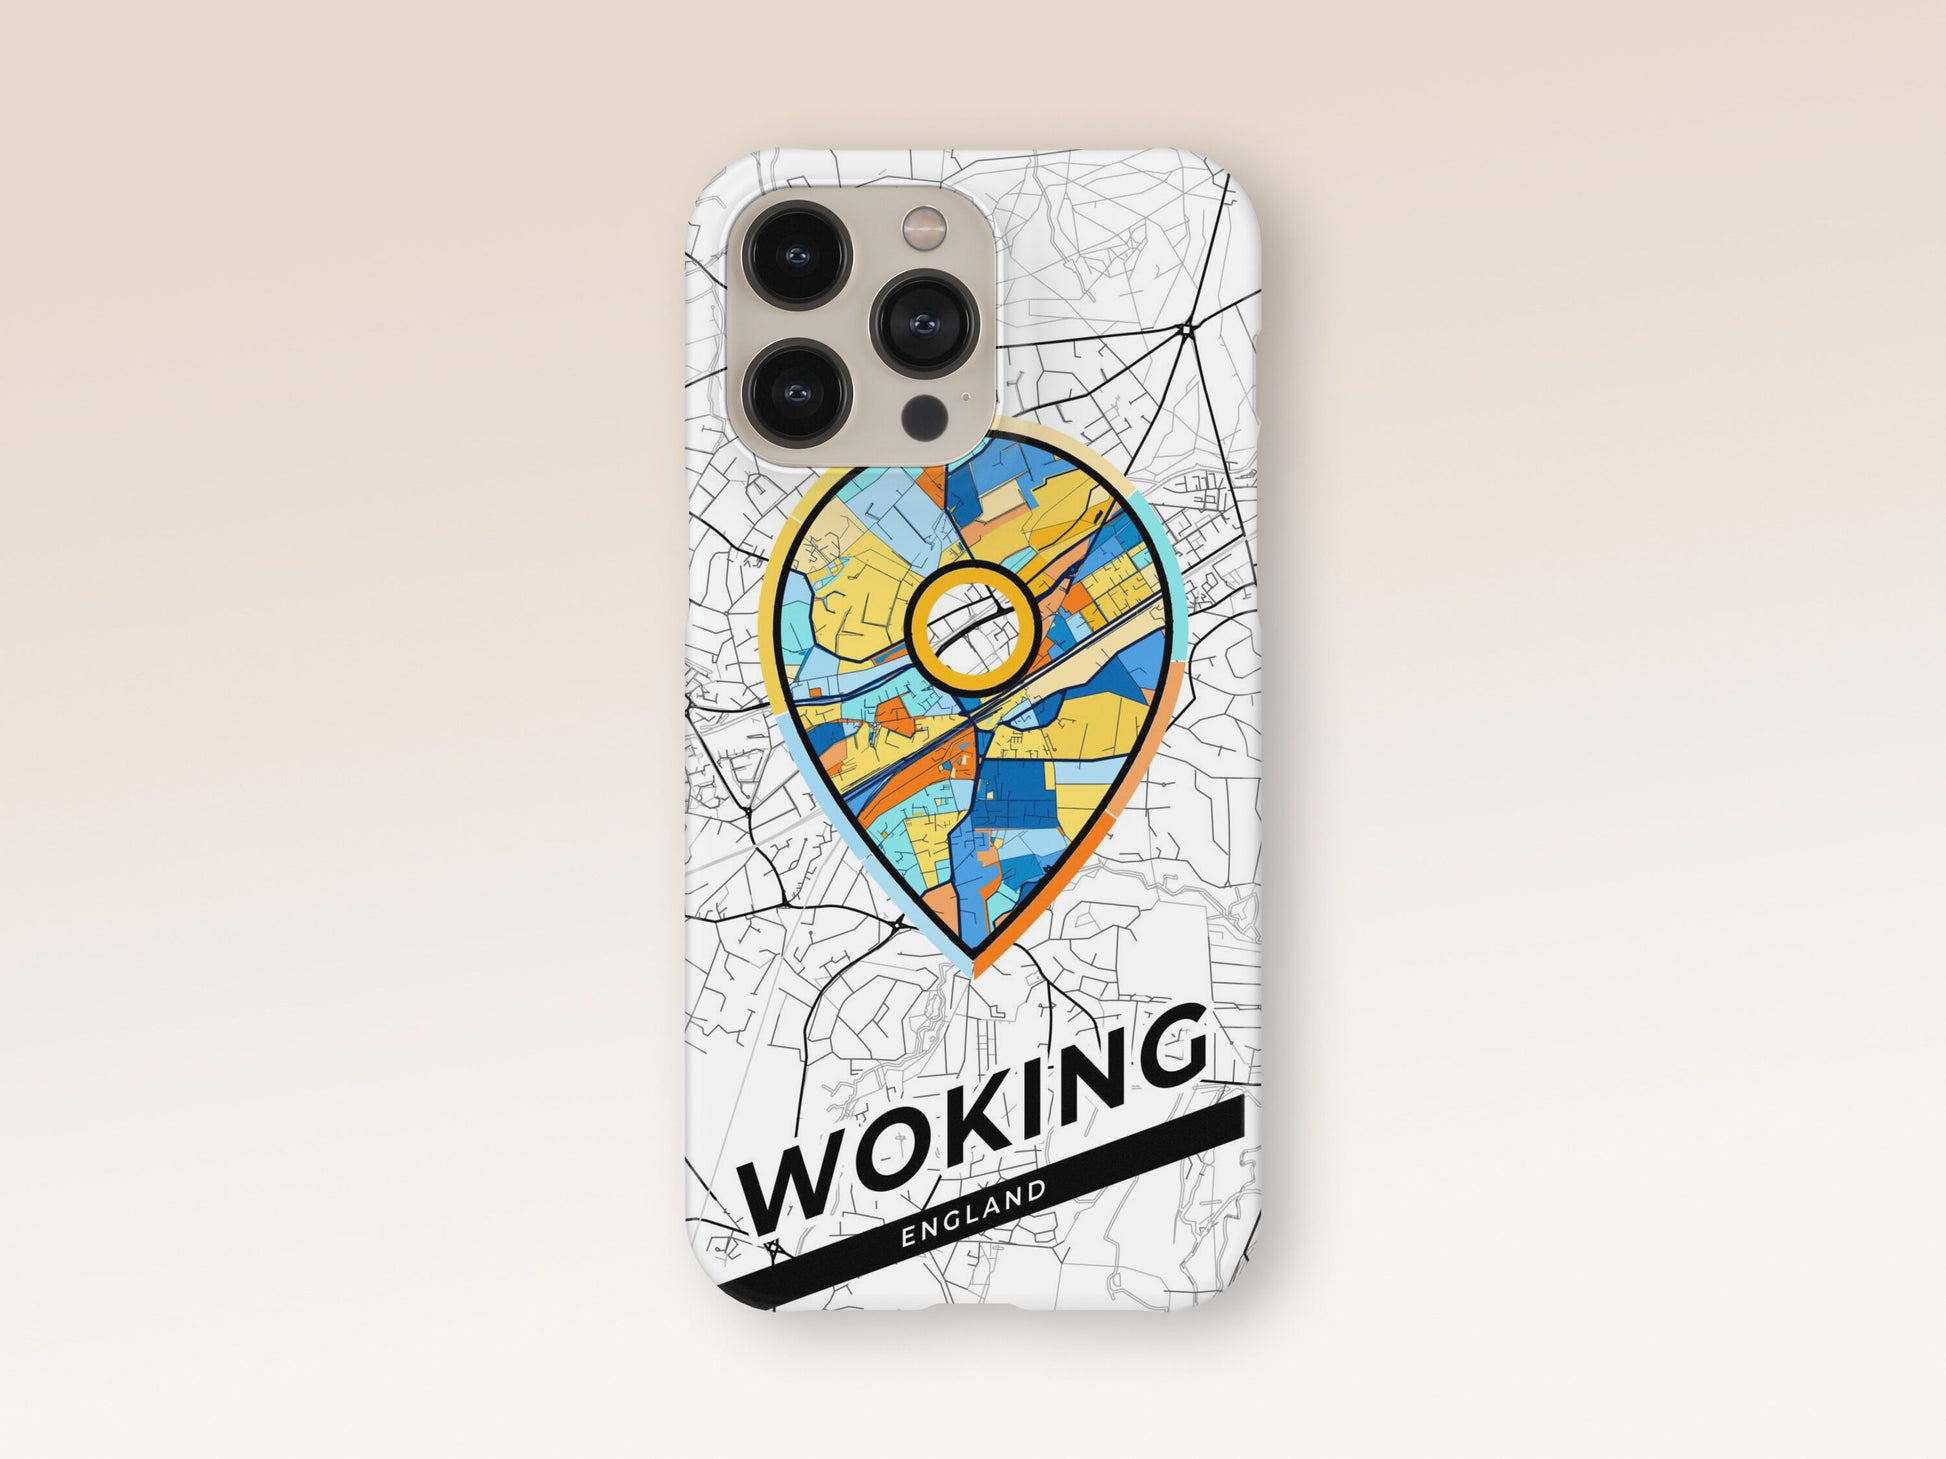 Woking England slim phone case with colorful icon 1